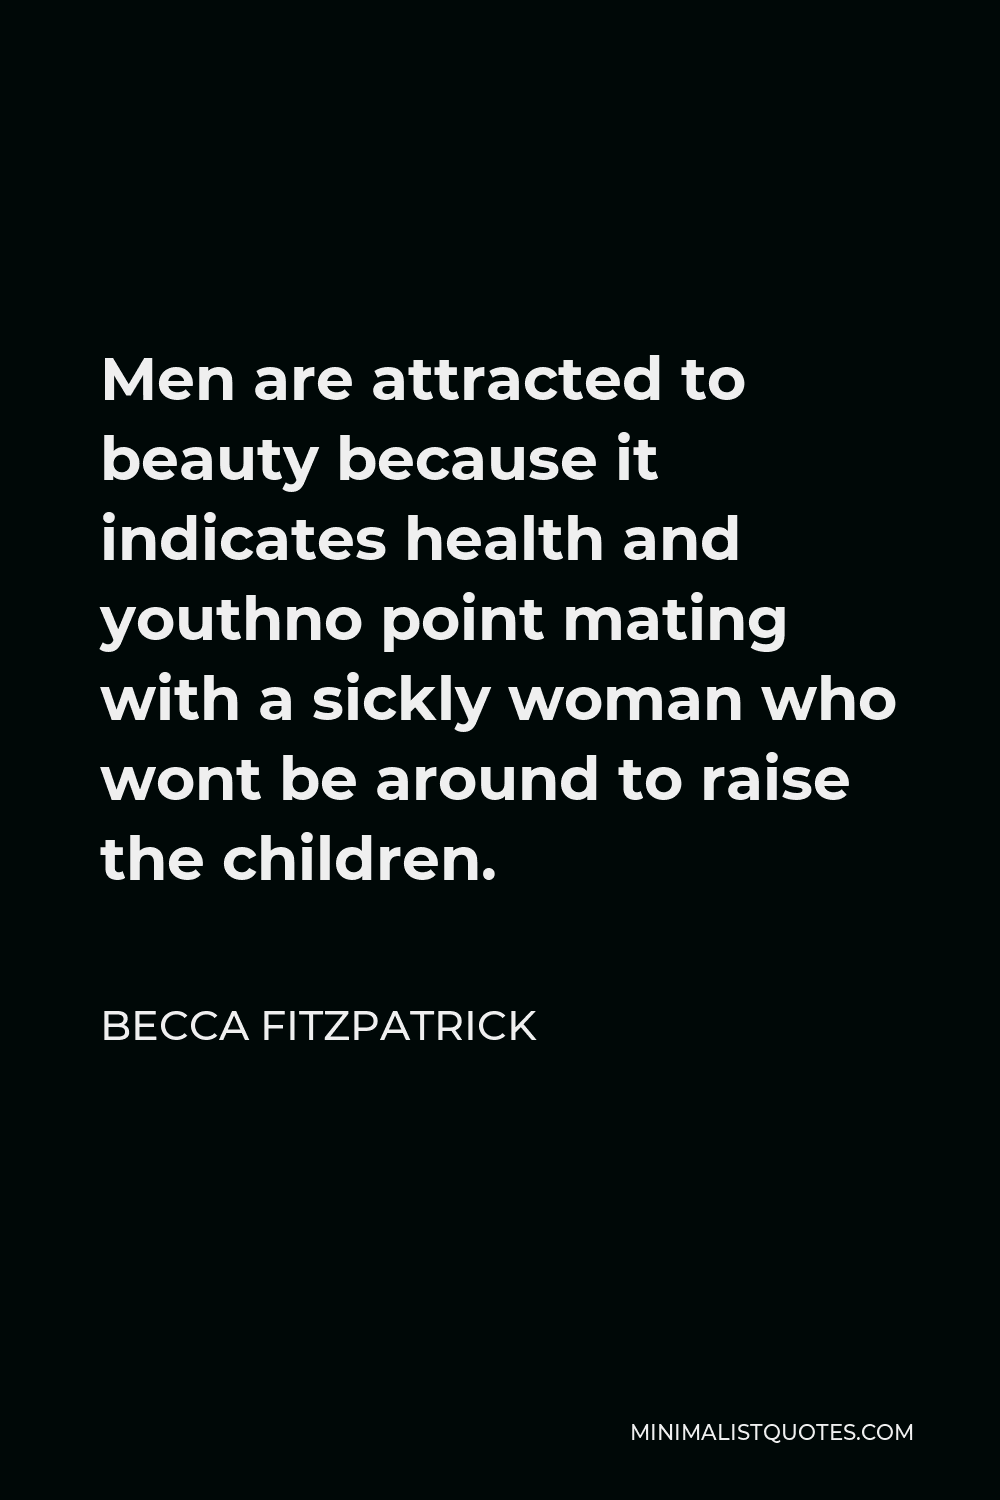 Becca Fitzpatrick Quote - Men are attracted to beauty because it indicates health and youthno point mating with a sickly woman who wont be around to raise the children.